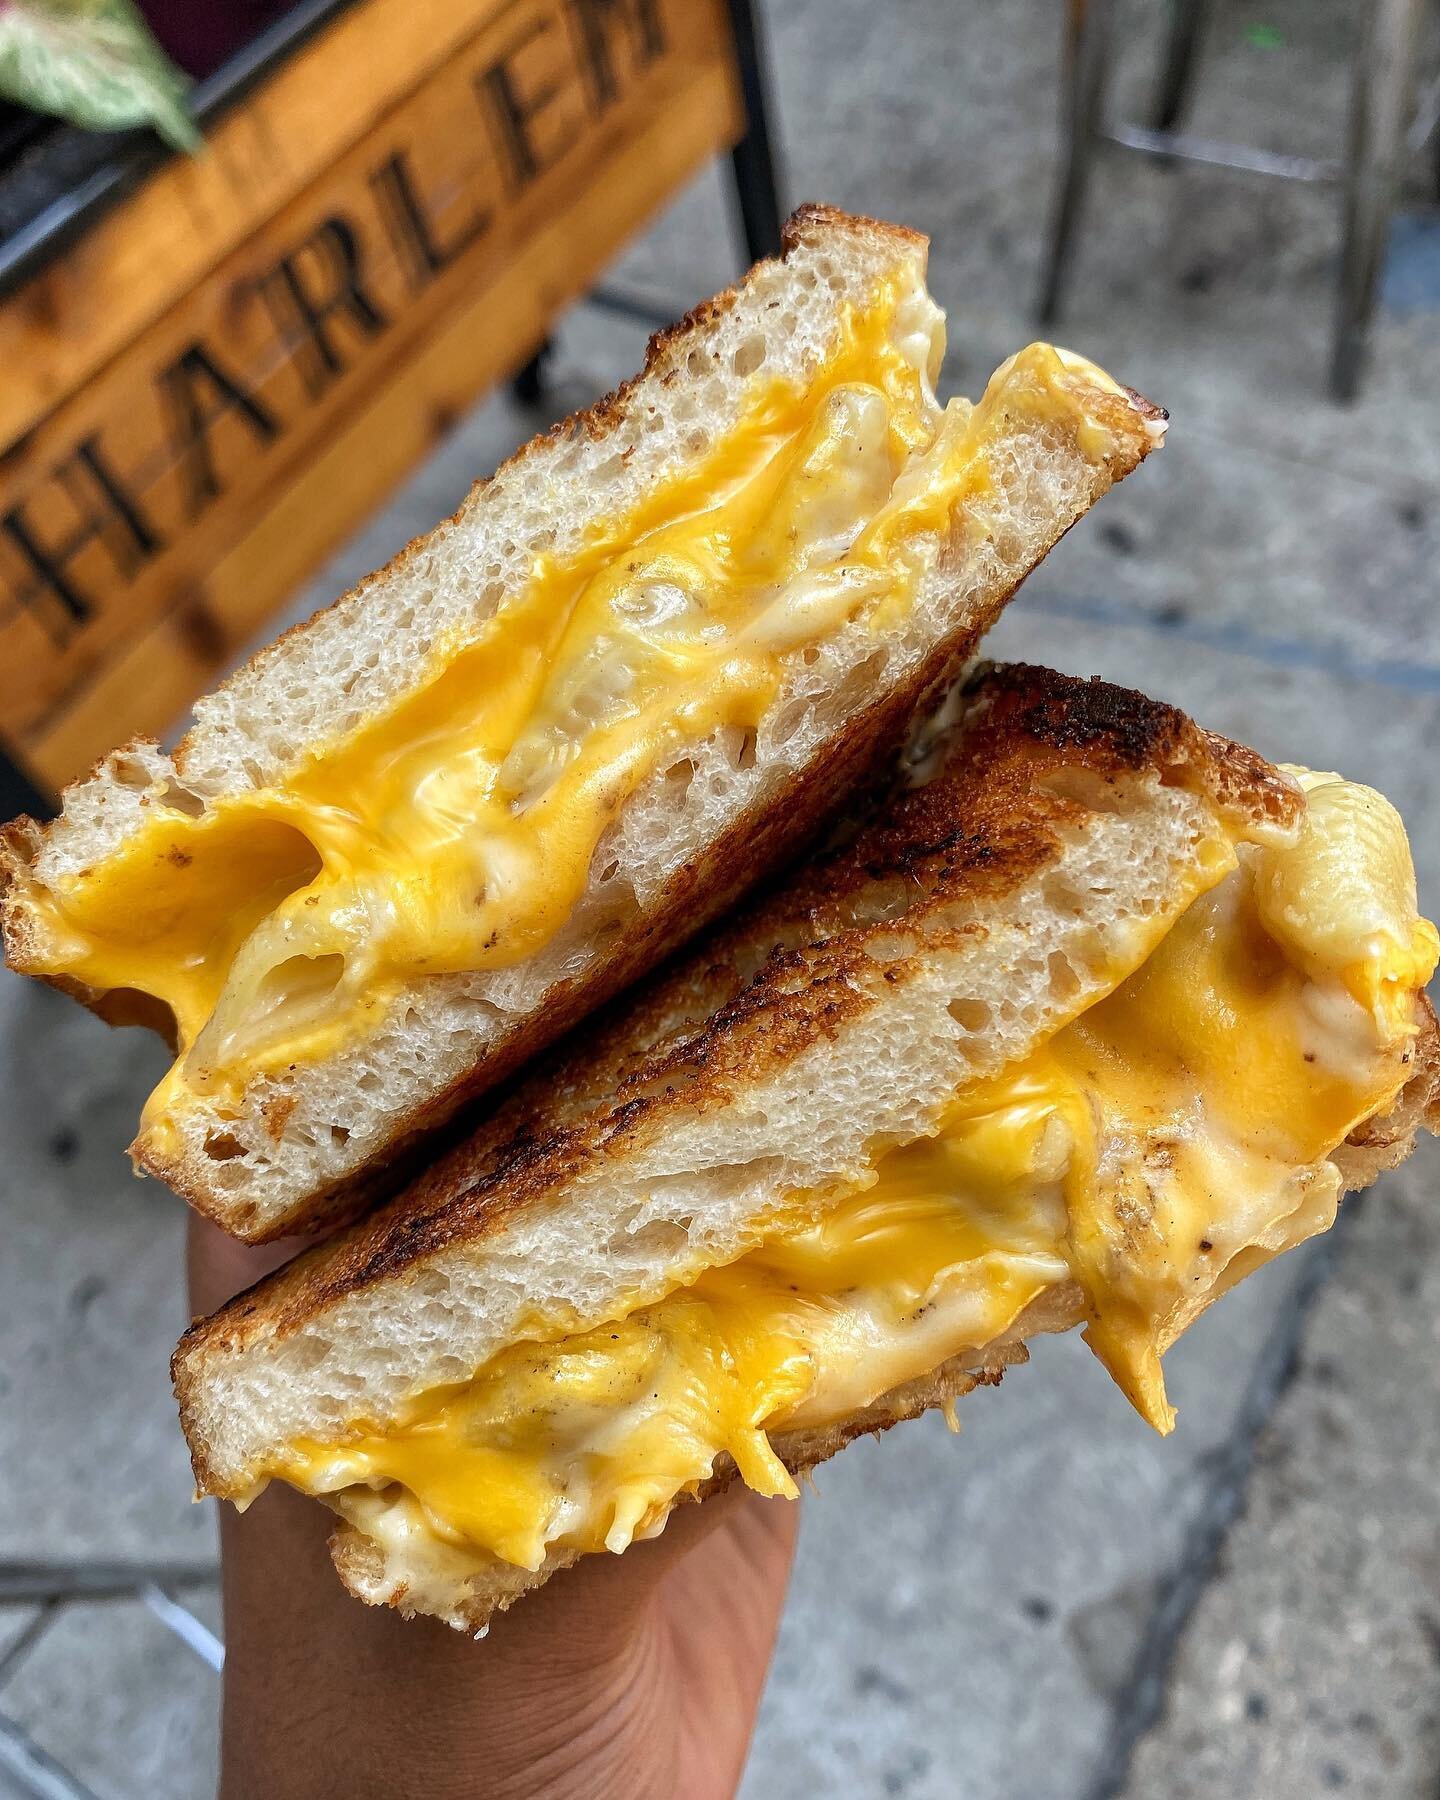 The HP GRILLED CHEESE with Cheddar &amp; Mac n&rsquo; Steez on Sourdough. 🔥 Seems like the right move today. #ATTHEWALLACE